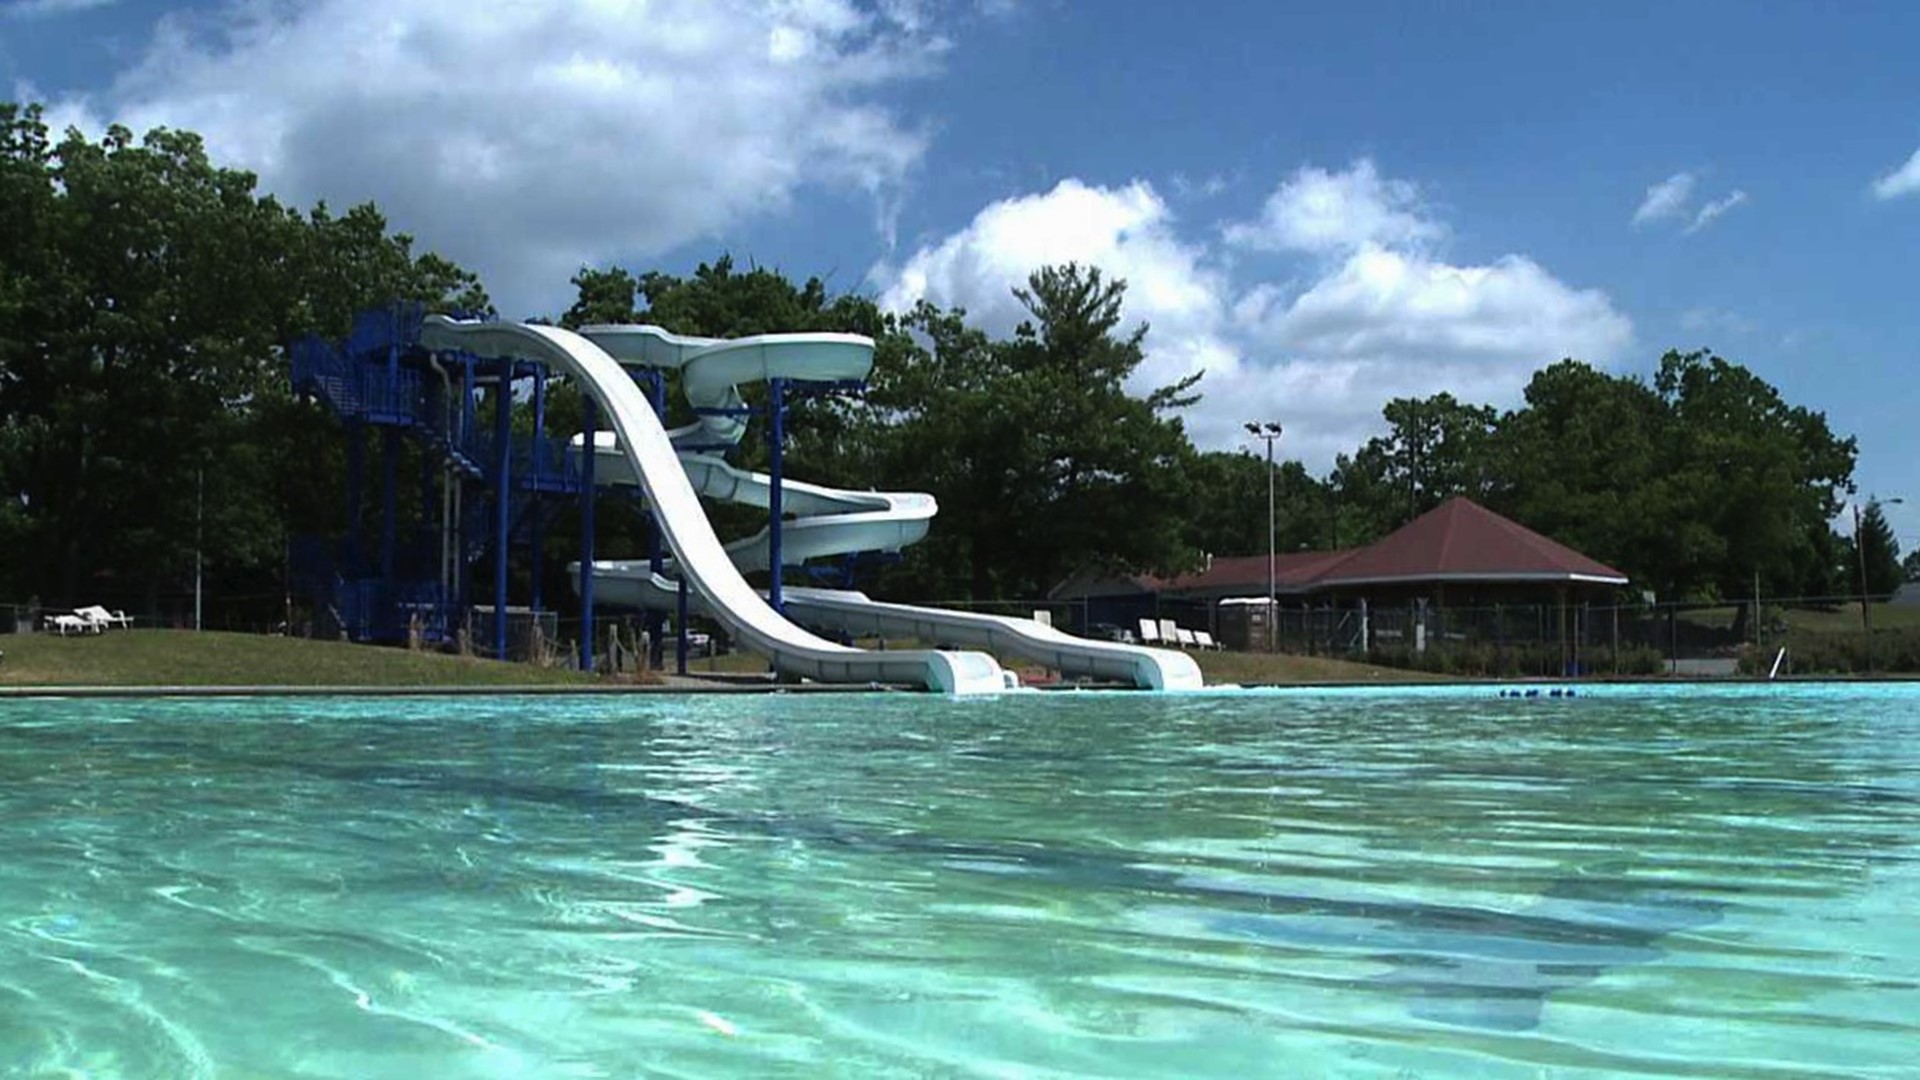 Free Pool Passes Available For Scranton Swimmers